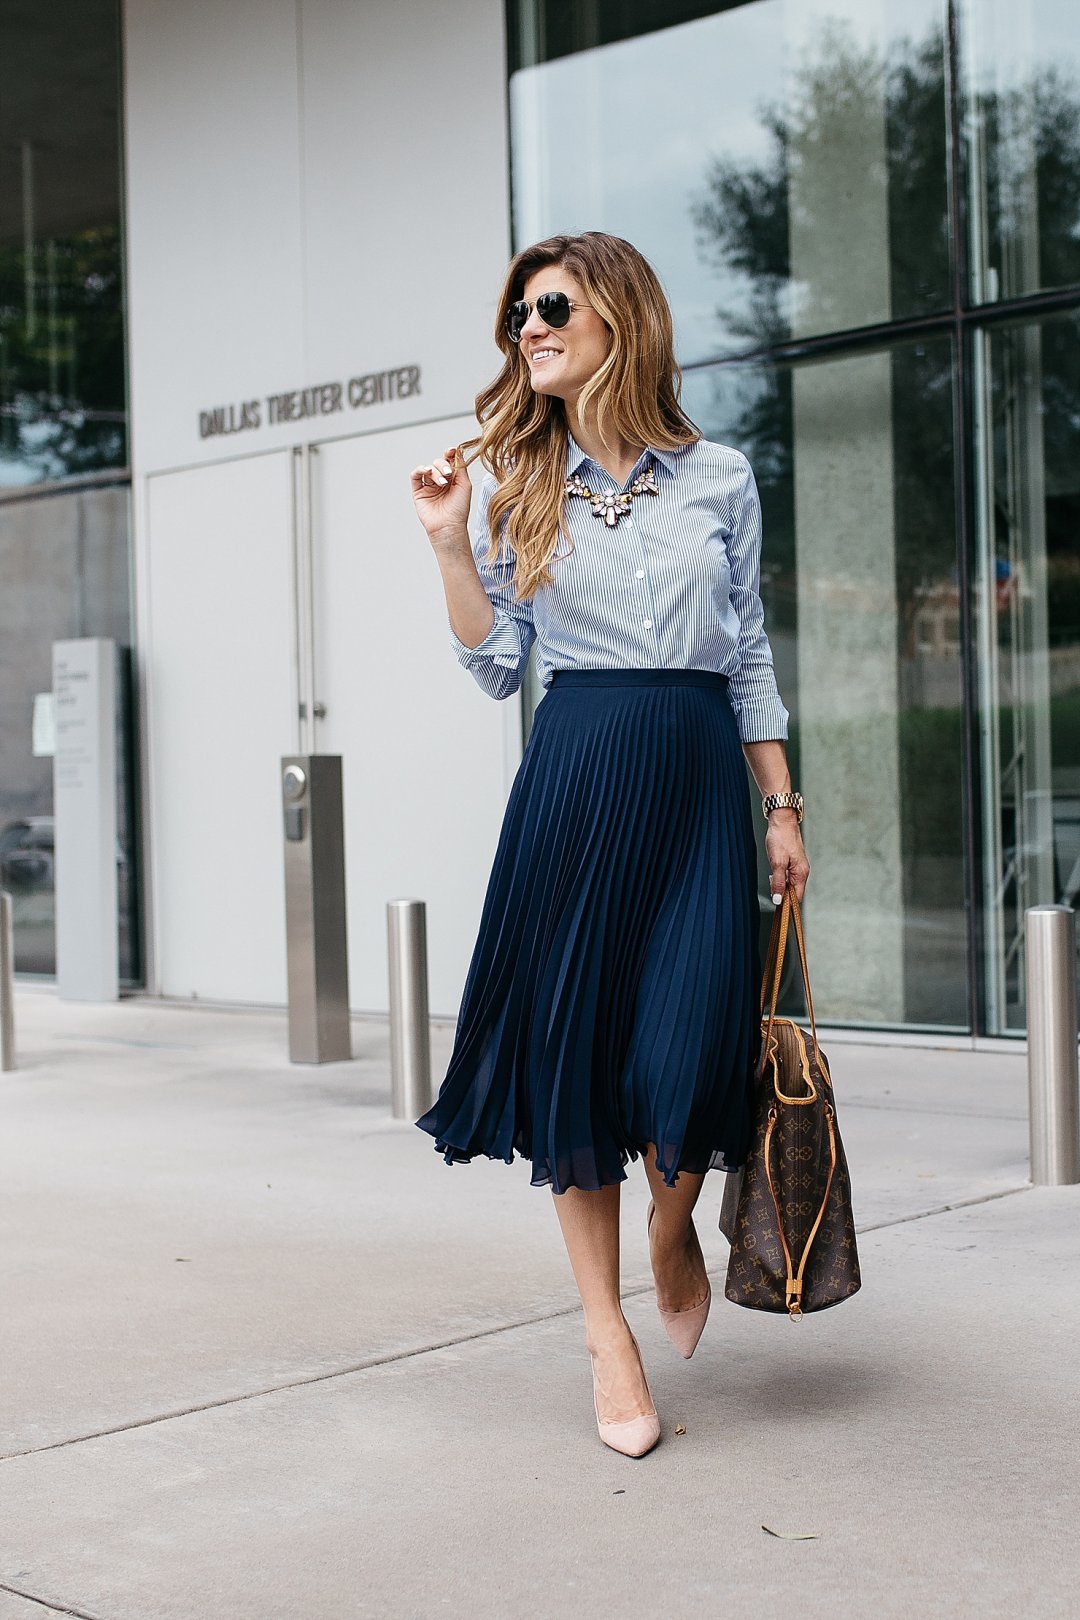 How To Incorporate Trends At Work - Dressing Stylish Yet Professional